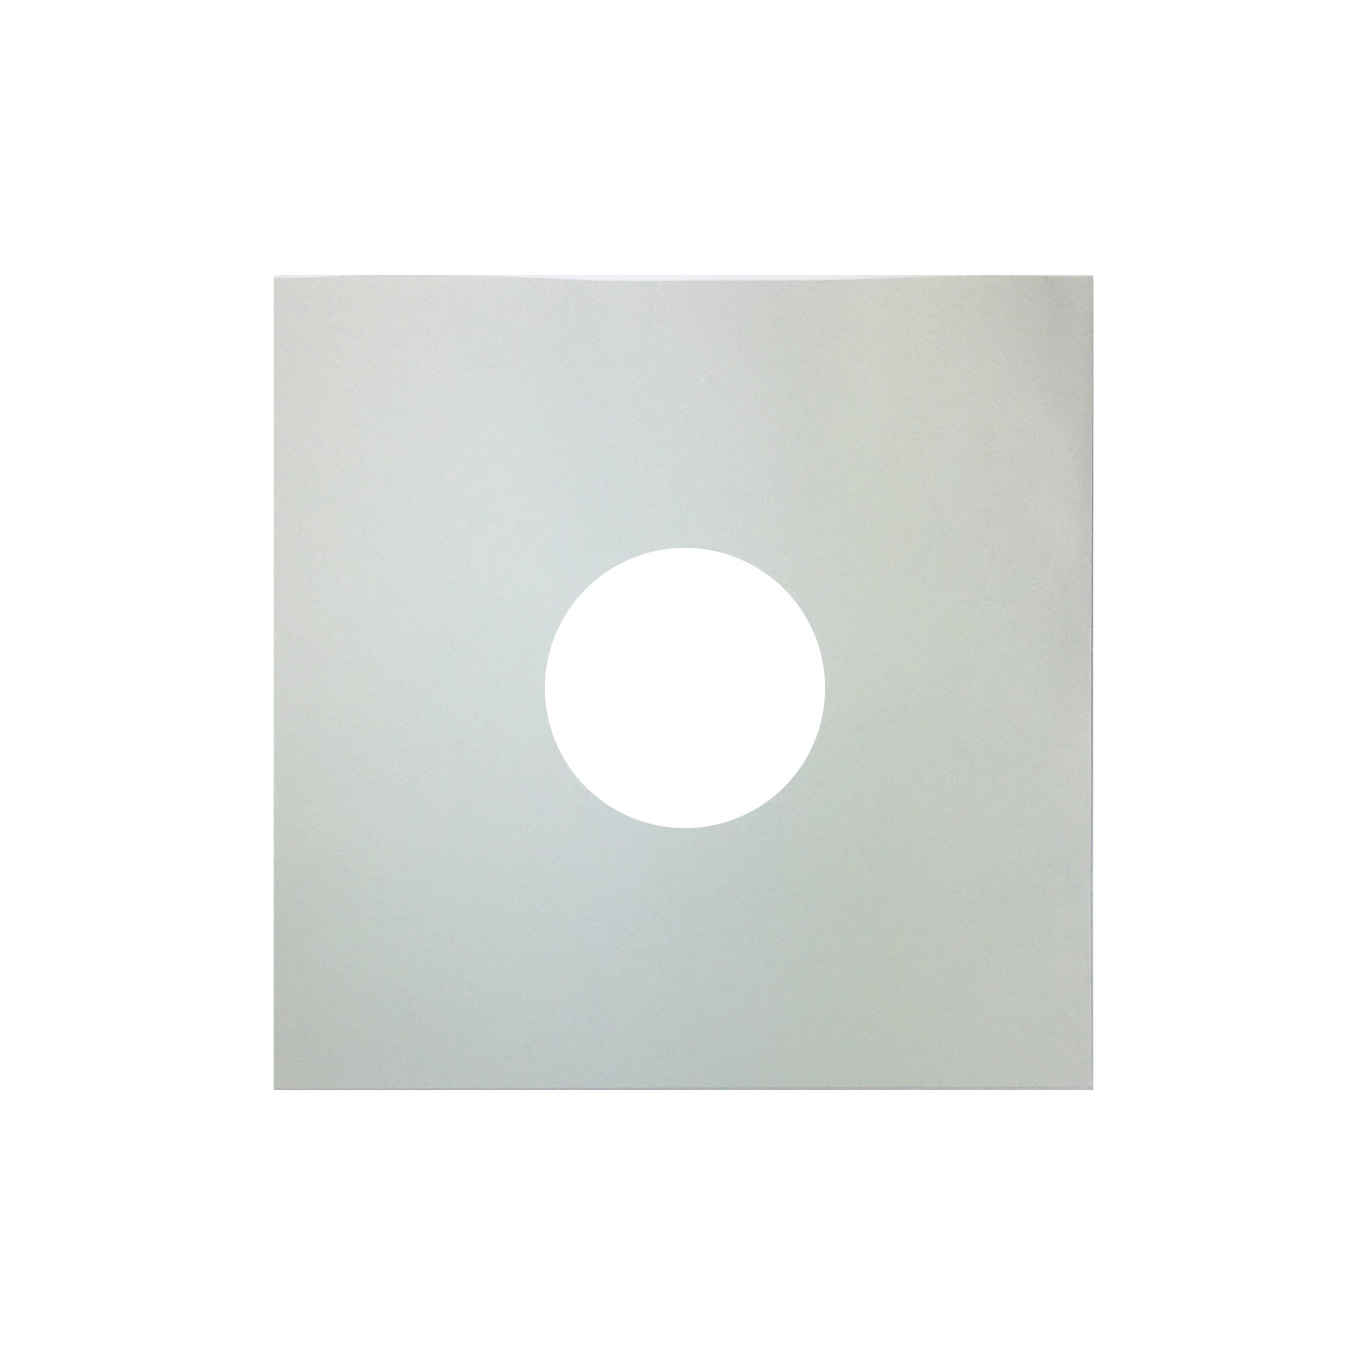 12″ inner sleeve with two holes